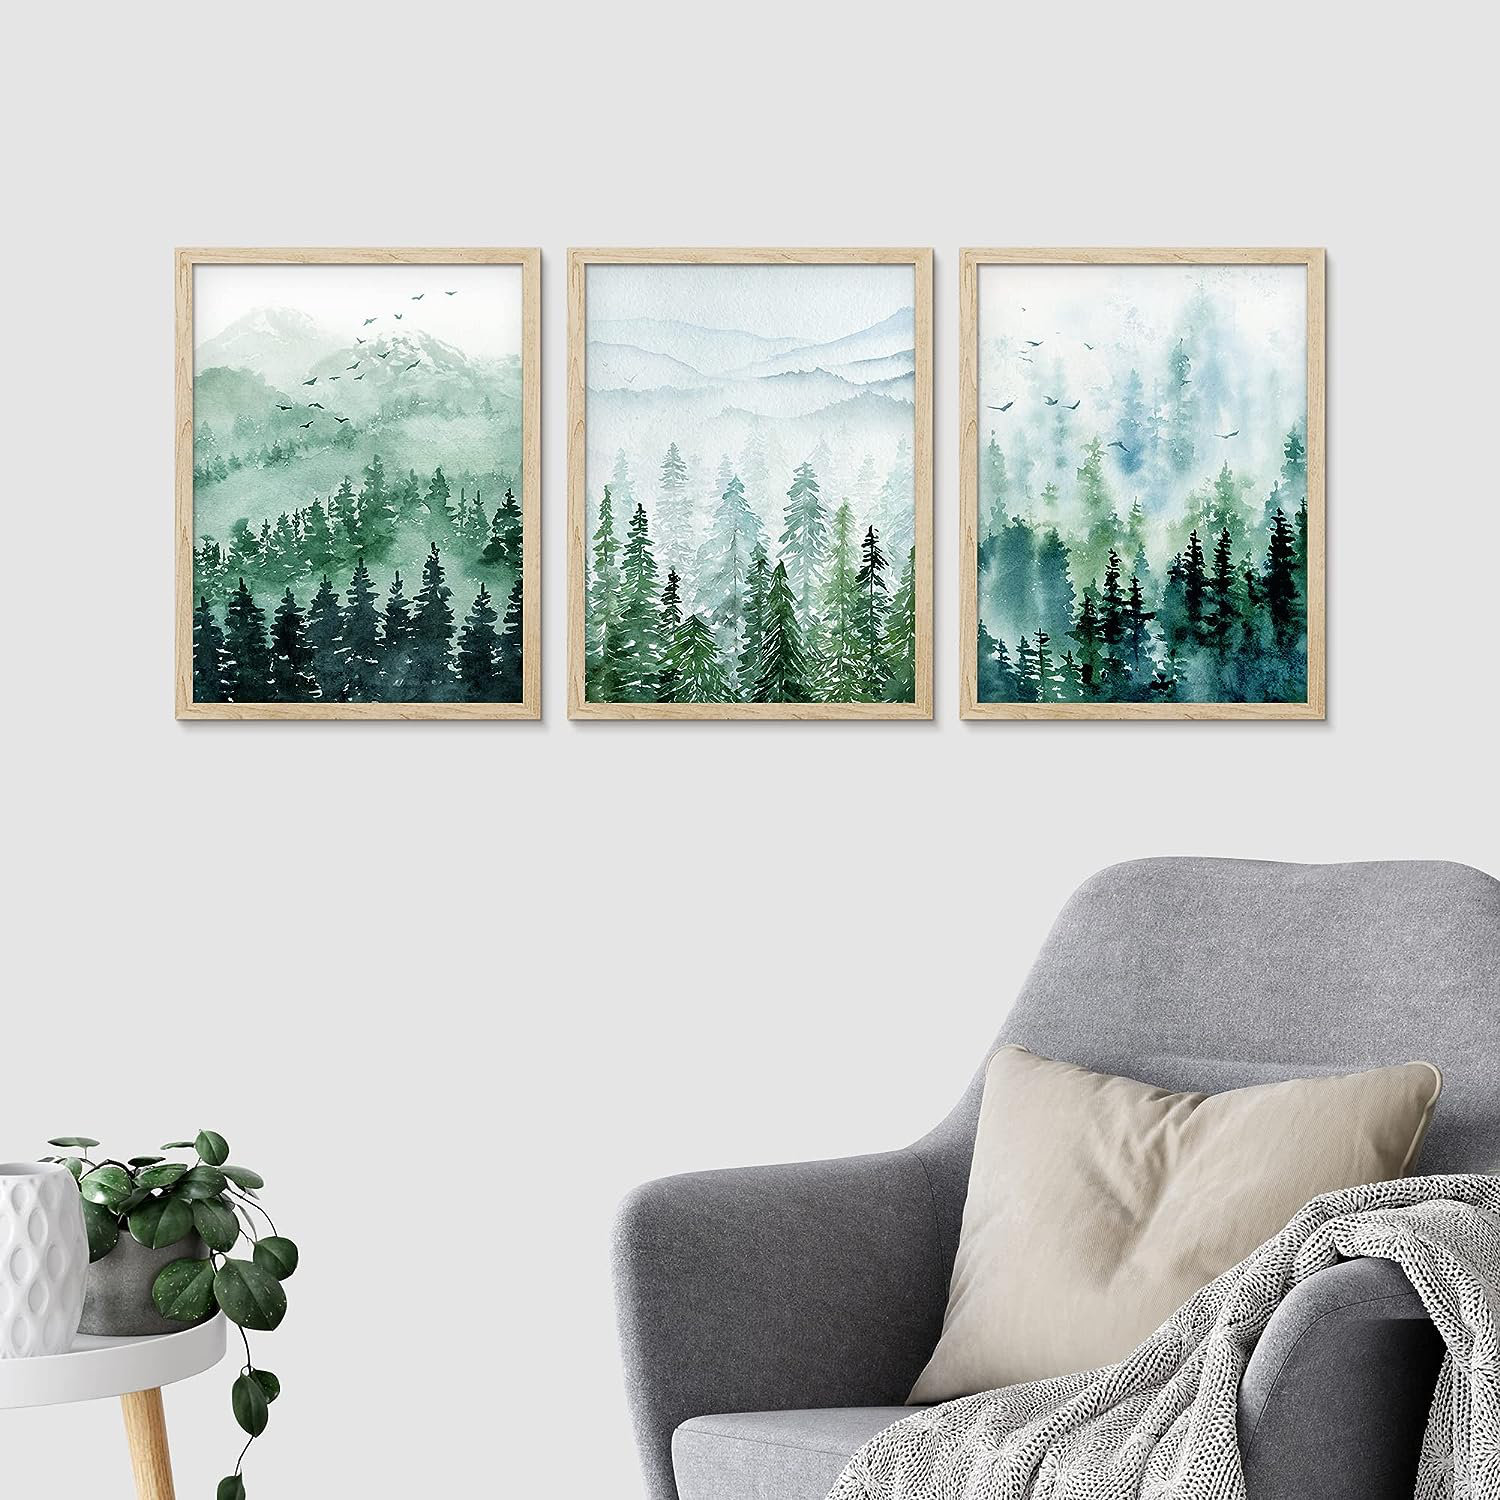 Print Framed IDEA4WALL Pieces Wilderness Room, Wayfair Pastel Art, Nature Tree 3 Watercolor Decor Wall Prints, Wall Set | Of Forest Living Framed For Bedroom Décor Pine 3 Wall